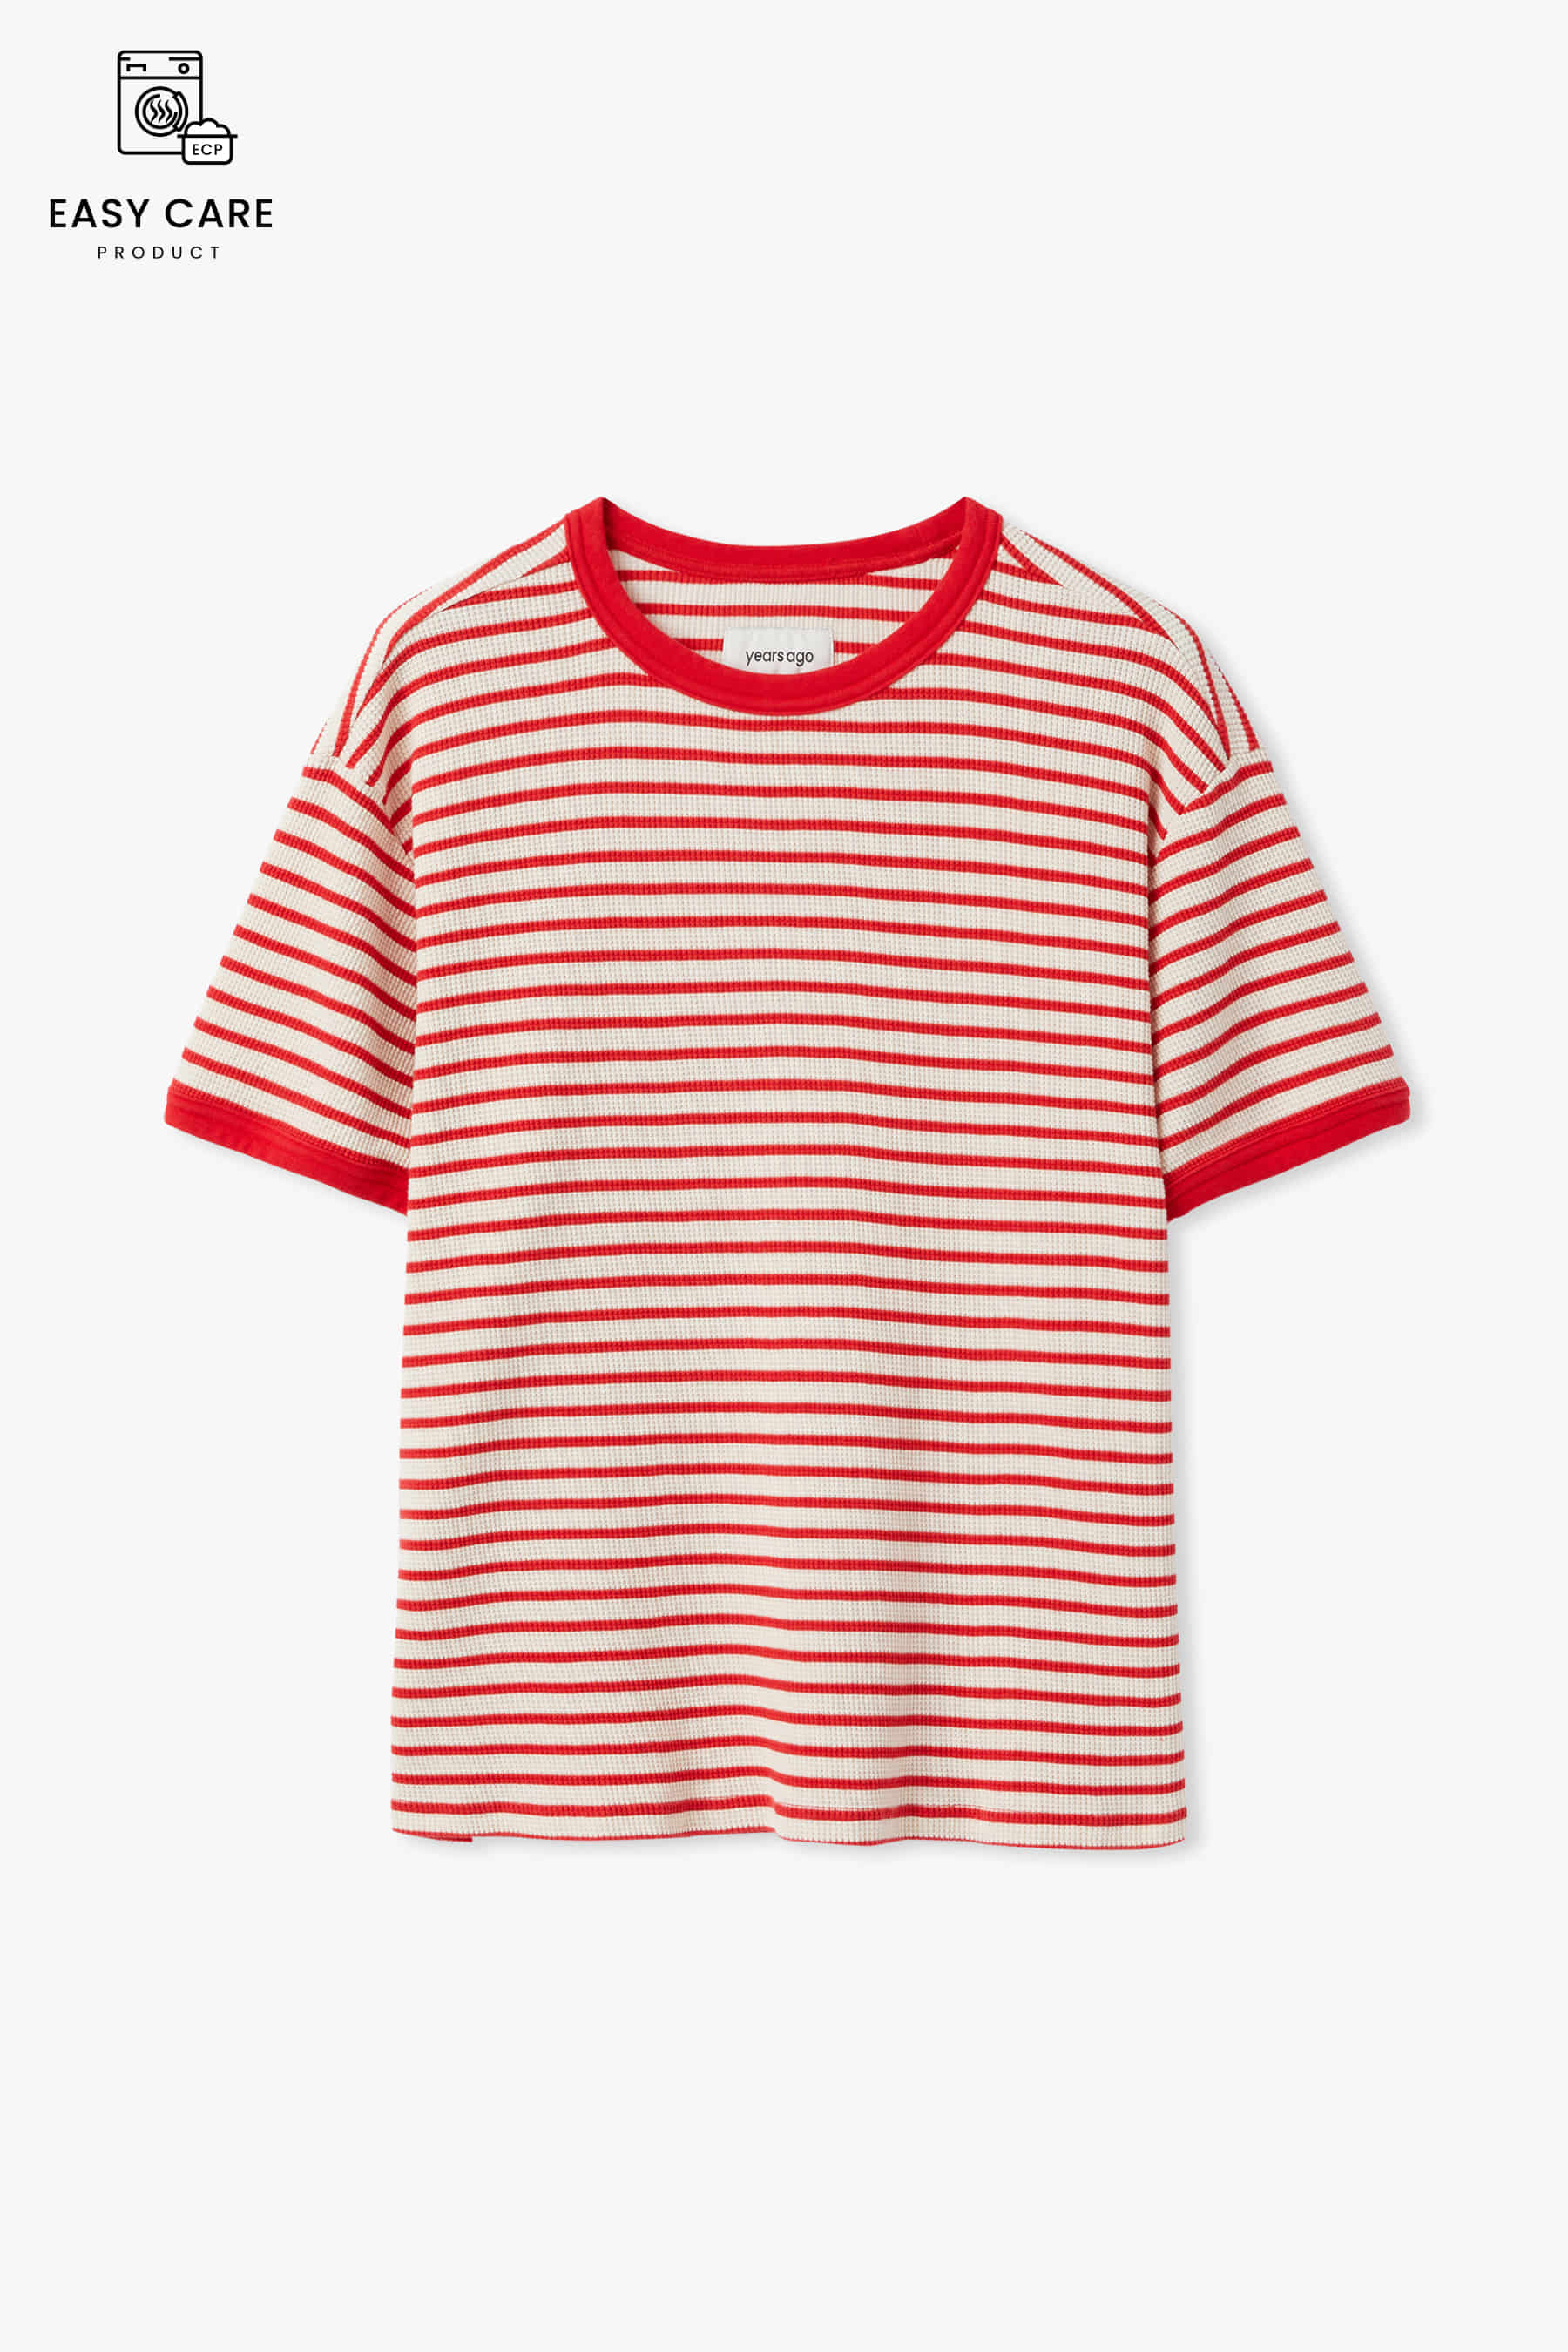 RED RIVI WAFFLE WASHED COTTON BASQUE T (ECP GARMENT PROCESS)